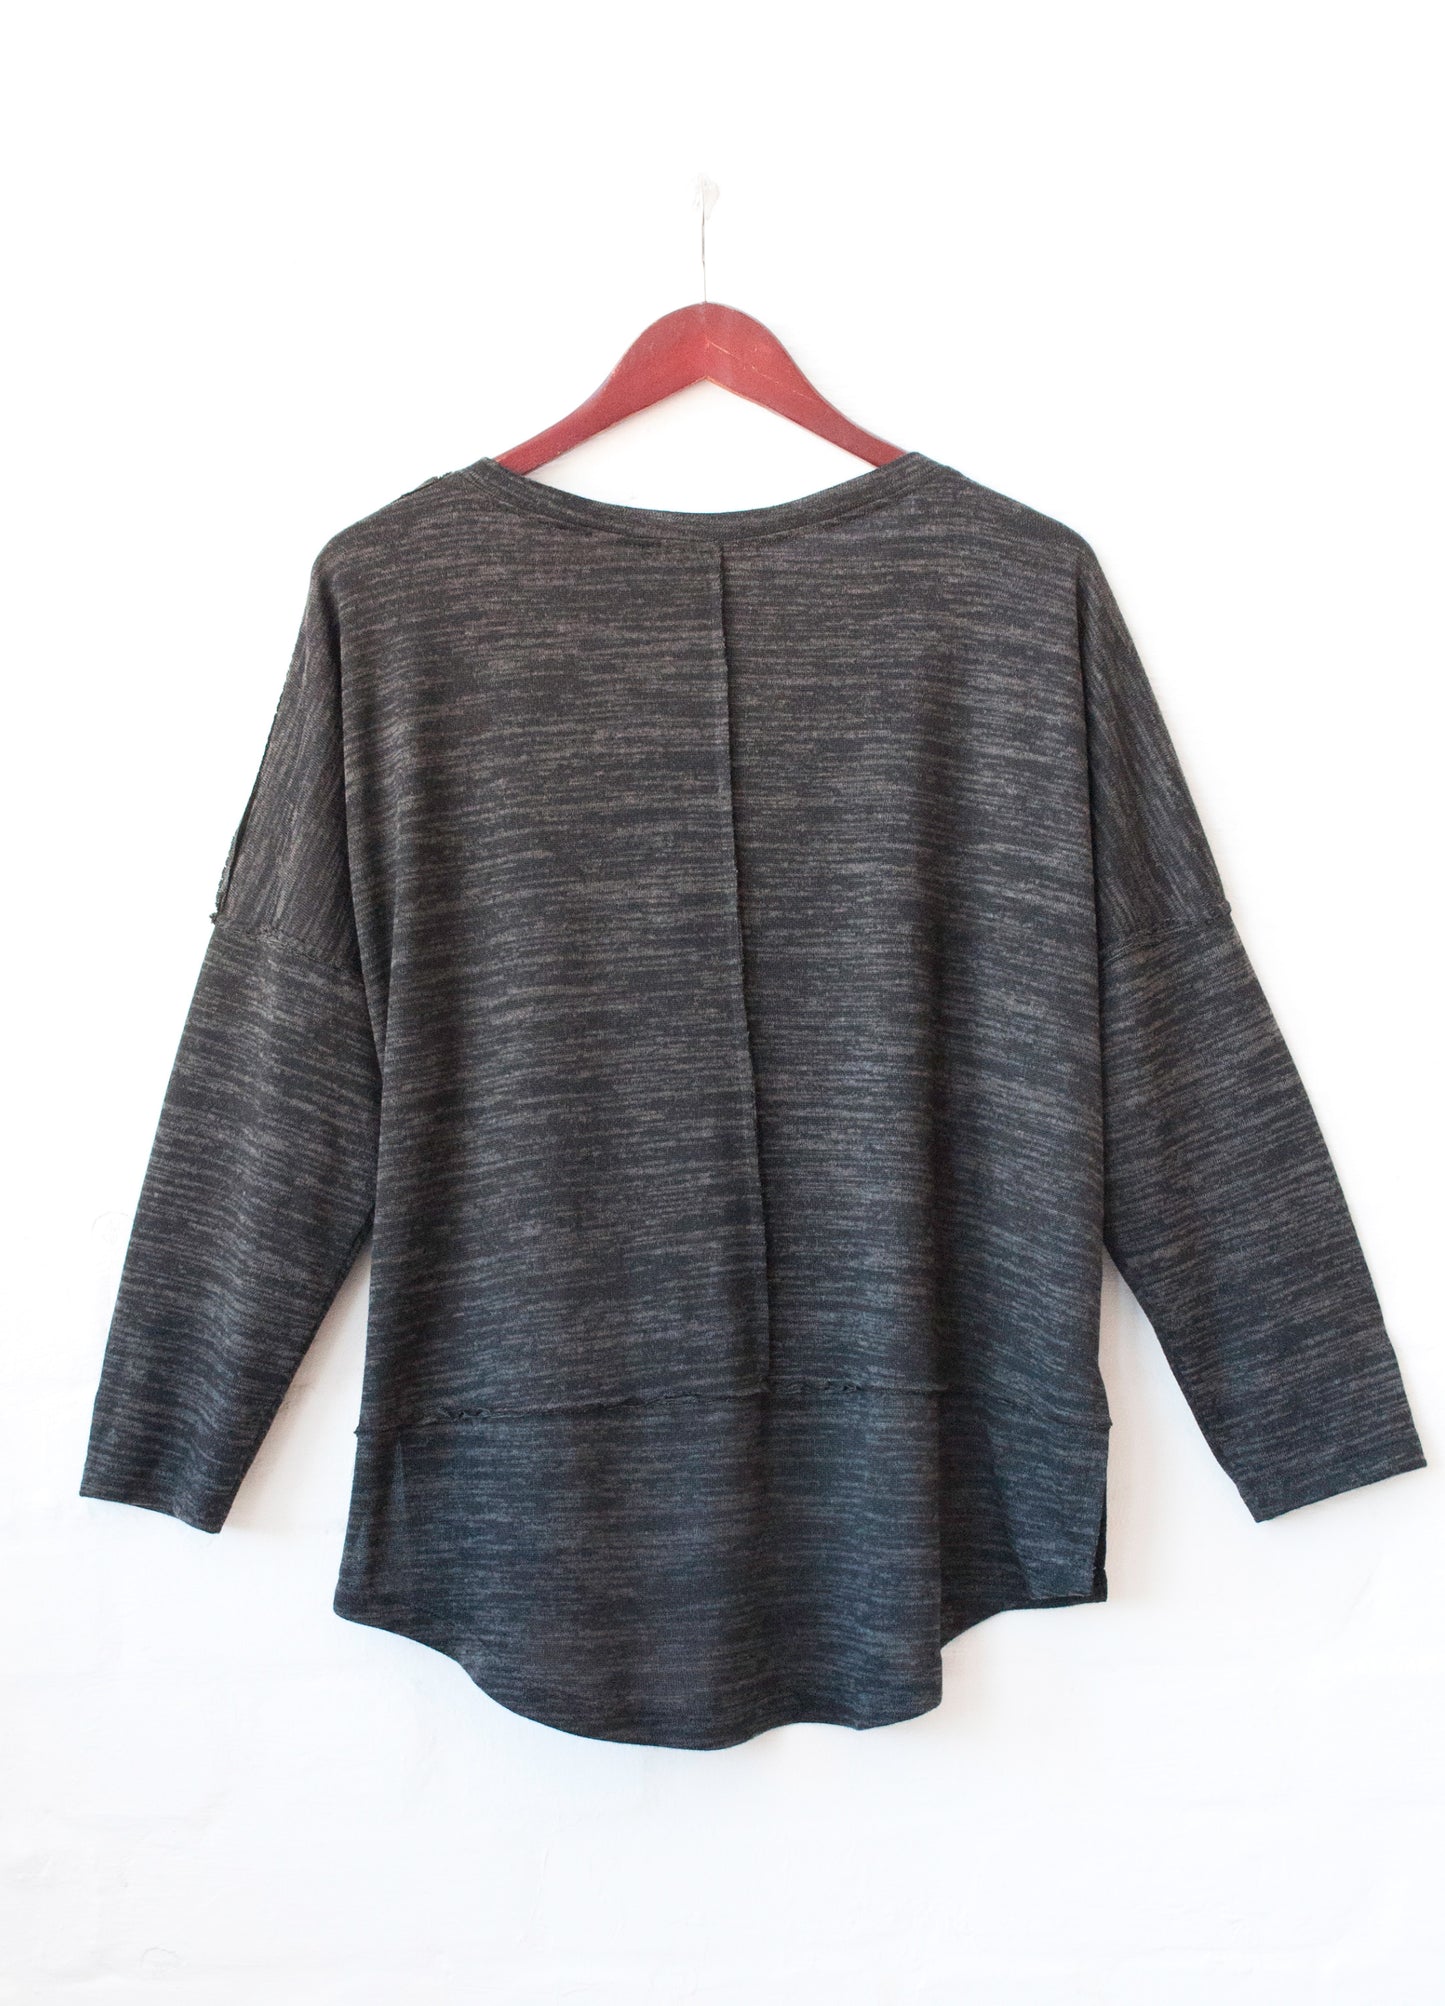 Mia Box Pullover in Charcoal melange cut & sew knit